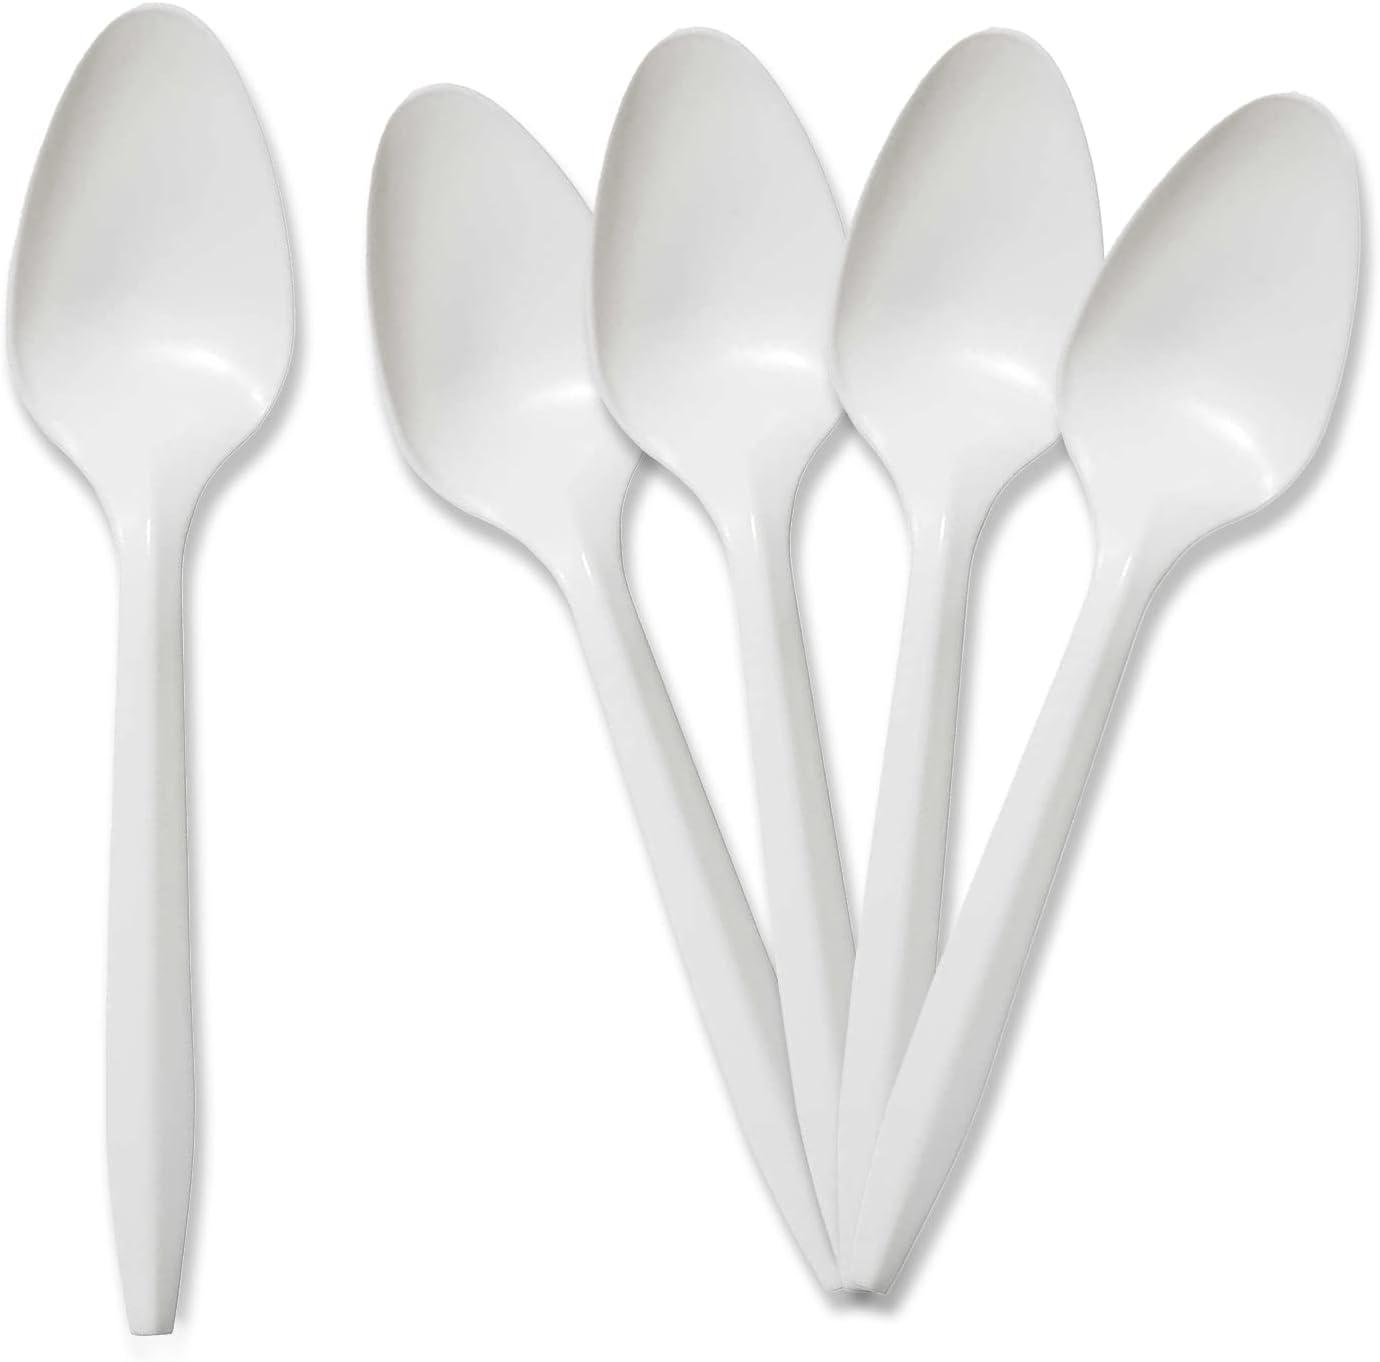 PAMI Medium-Weight Disposable Plastic Teaspoons 400-Pack - Bulk White Plastic  Silverware For Parties, Weddings, Catering Food Stands, Takeaway Orders &  More- Sturdy Single-Use Partyware Spoons